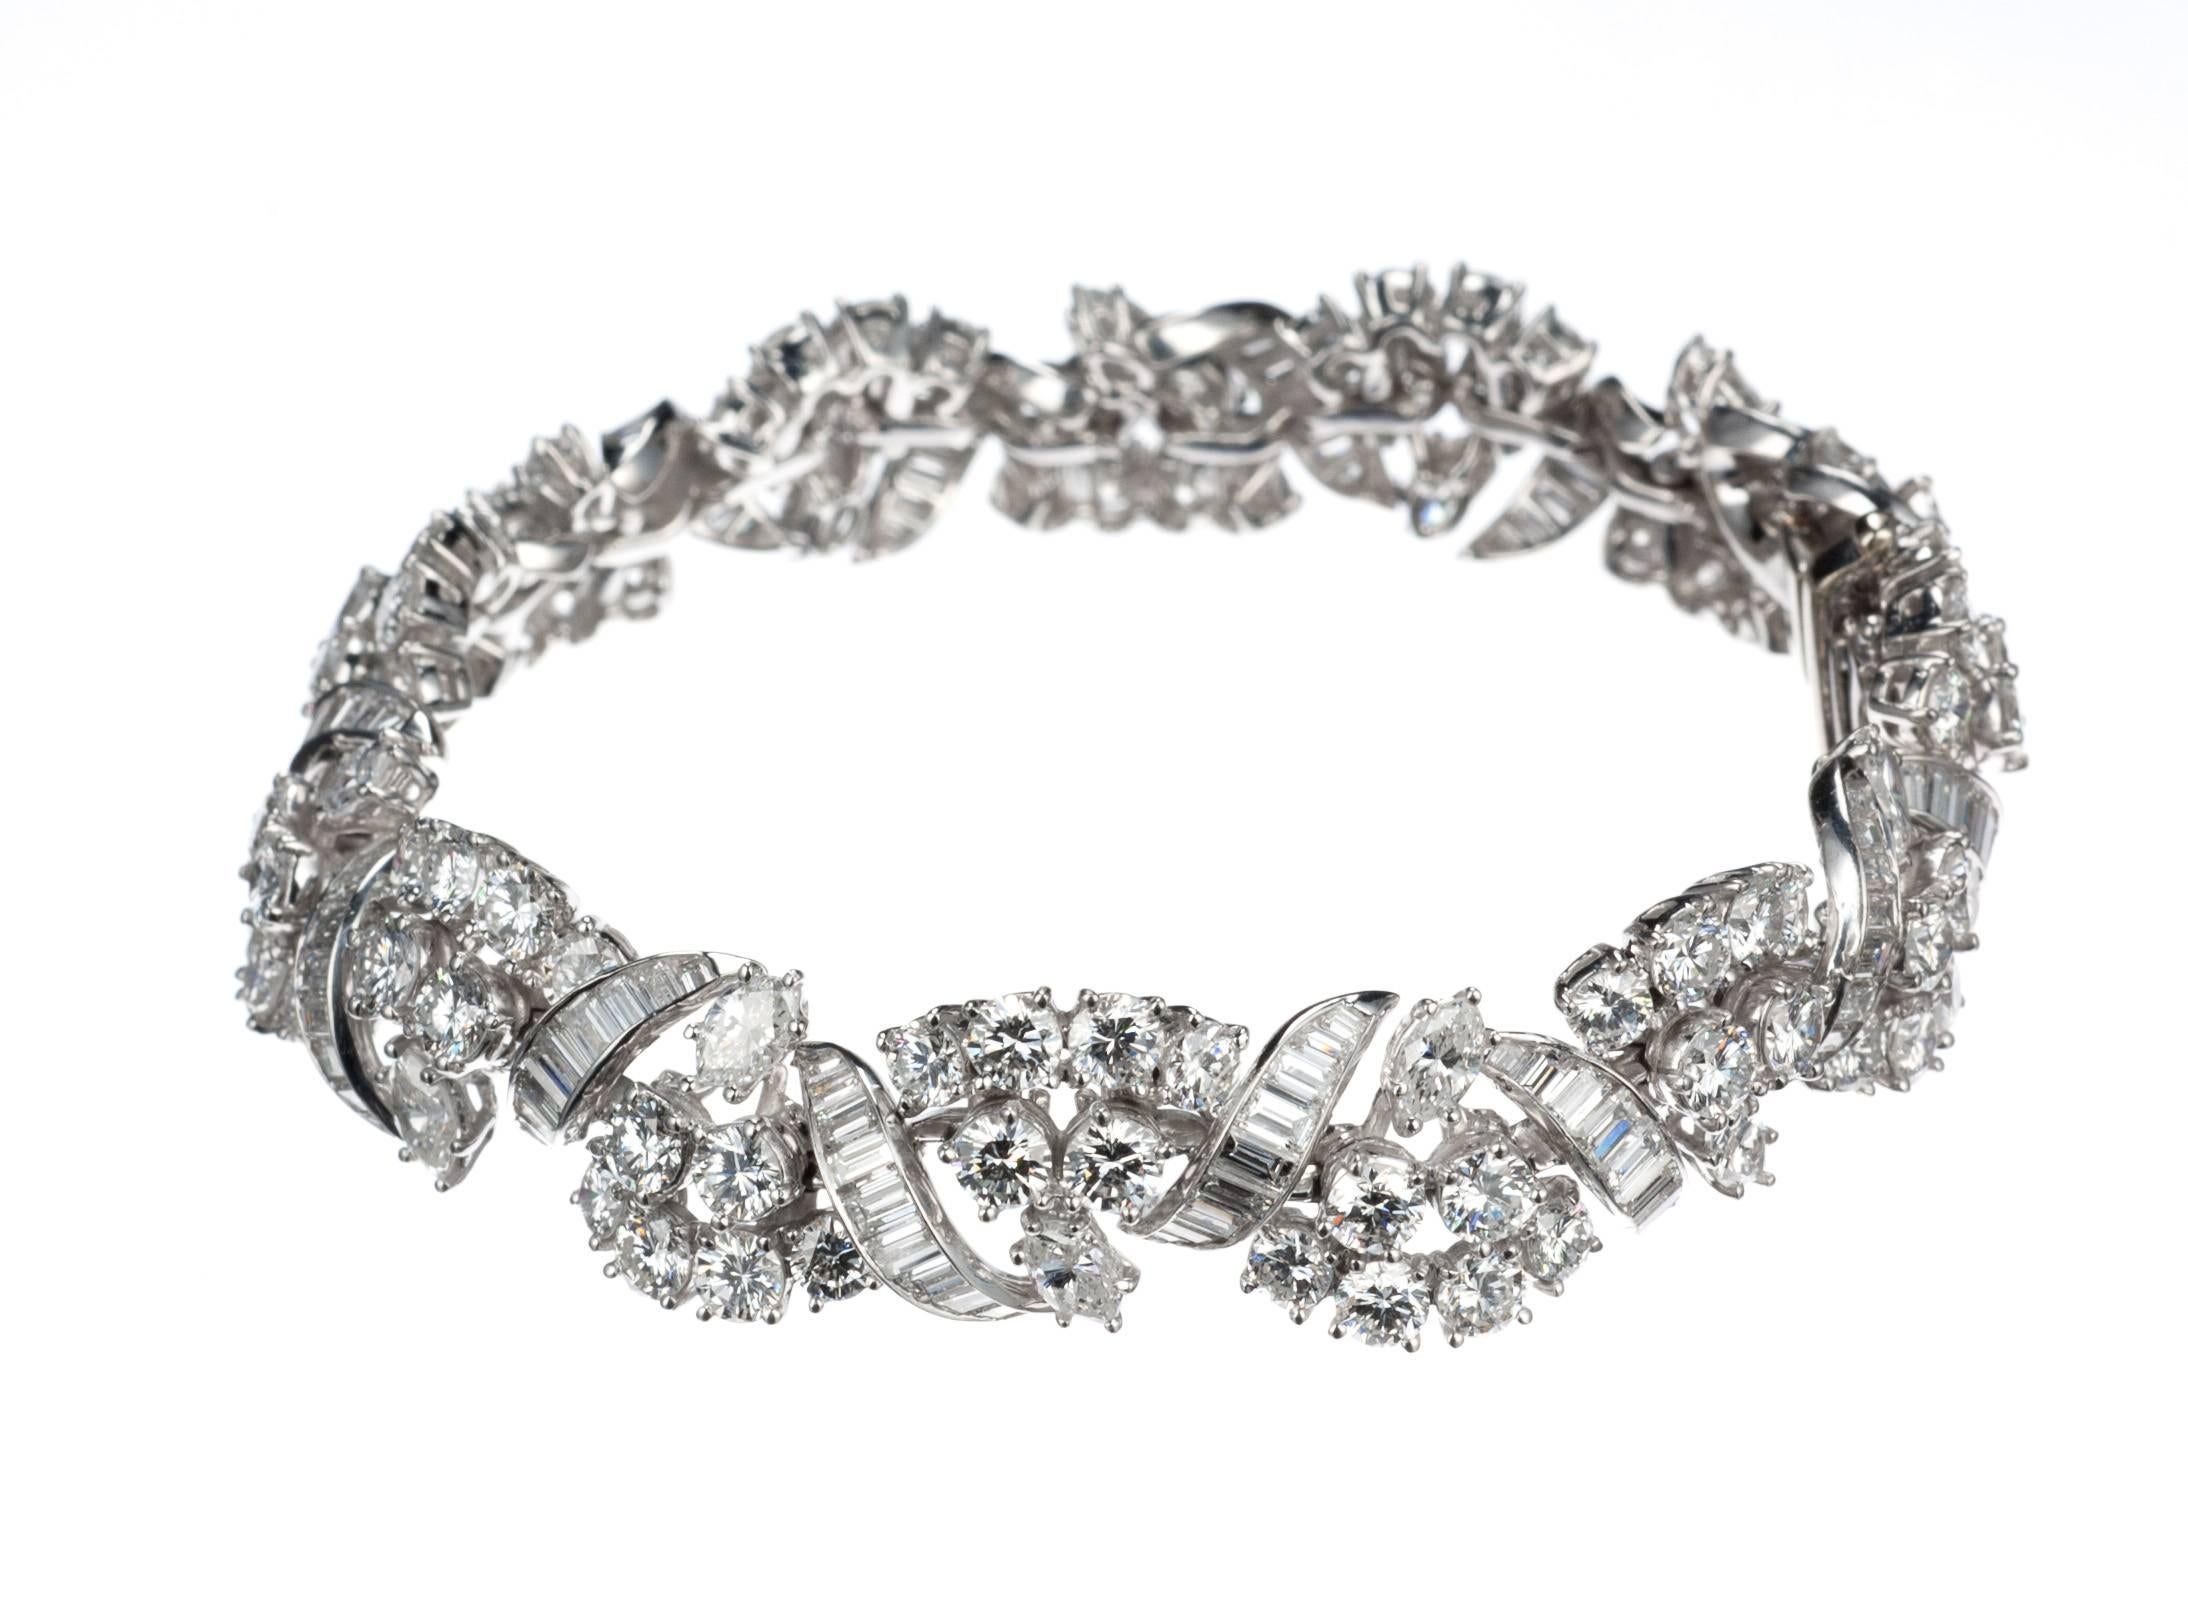 A platinum diamond bracelet fashioned in subtle natural motifs like a charming garland of leaves. Set with a dazzling array of diamonds including 88 brilliant-cut round diamonds, 11.16ctw., 135 baguette-shaped diamonds, 5.37ctw., and 14